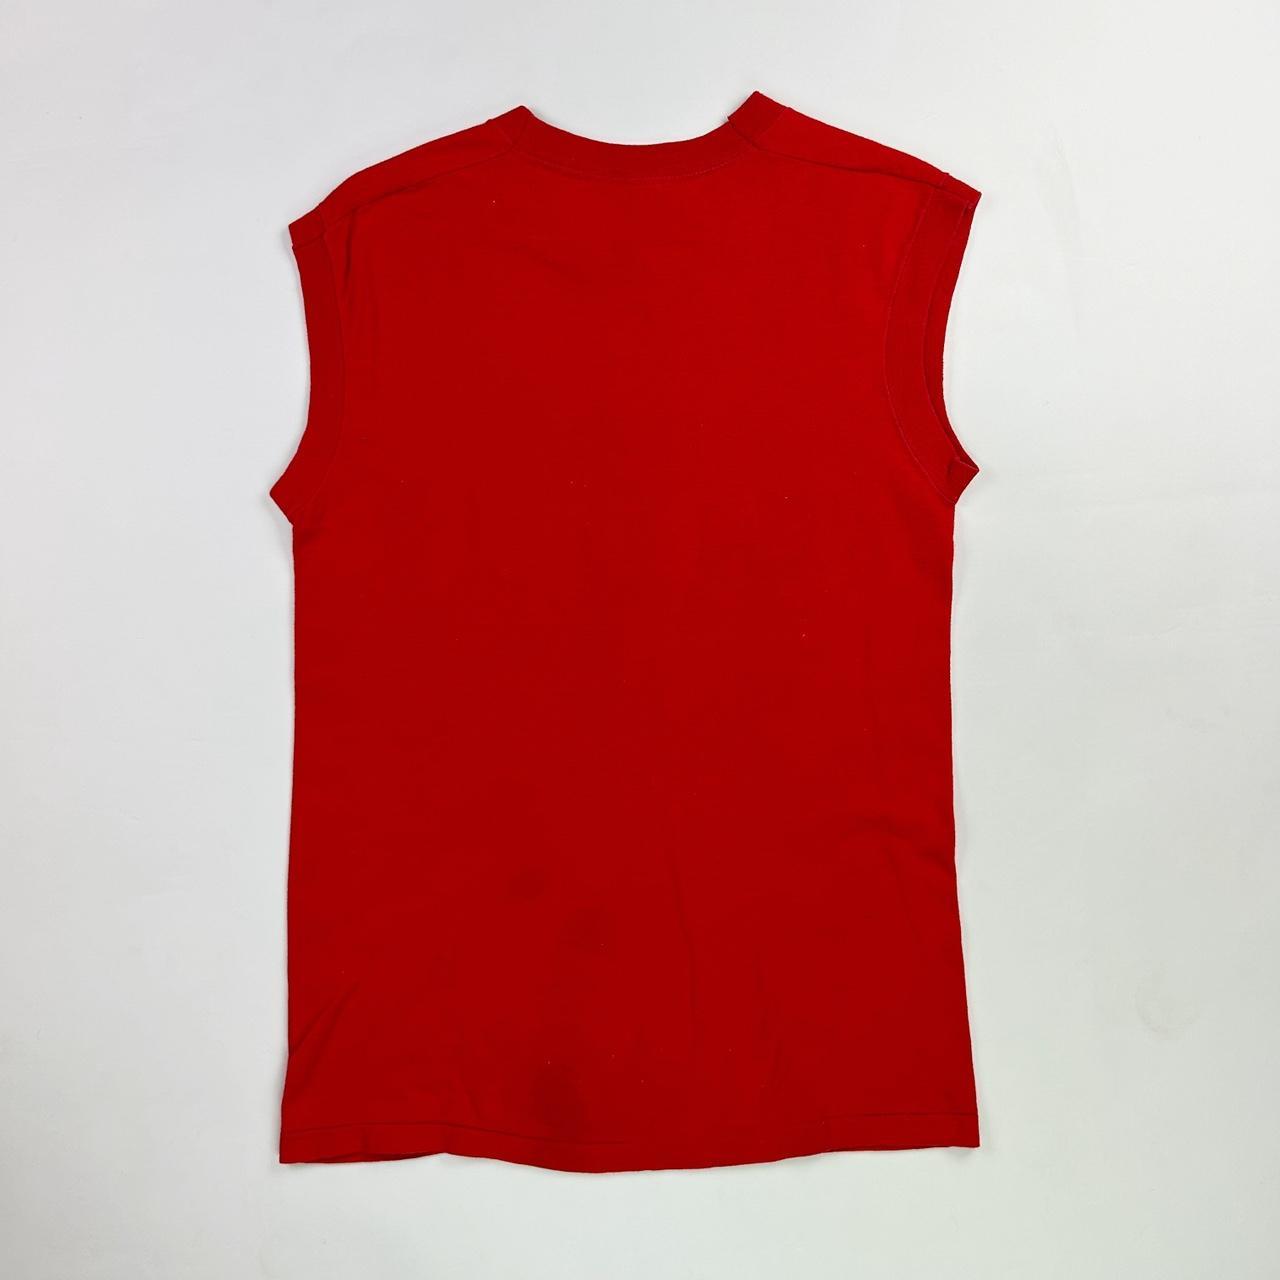 Screen Stars Women's Red and White Vest (4)